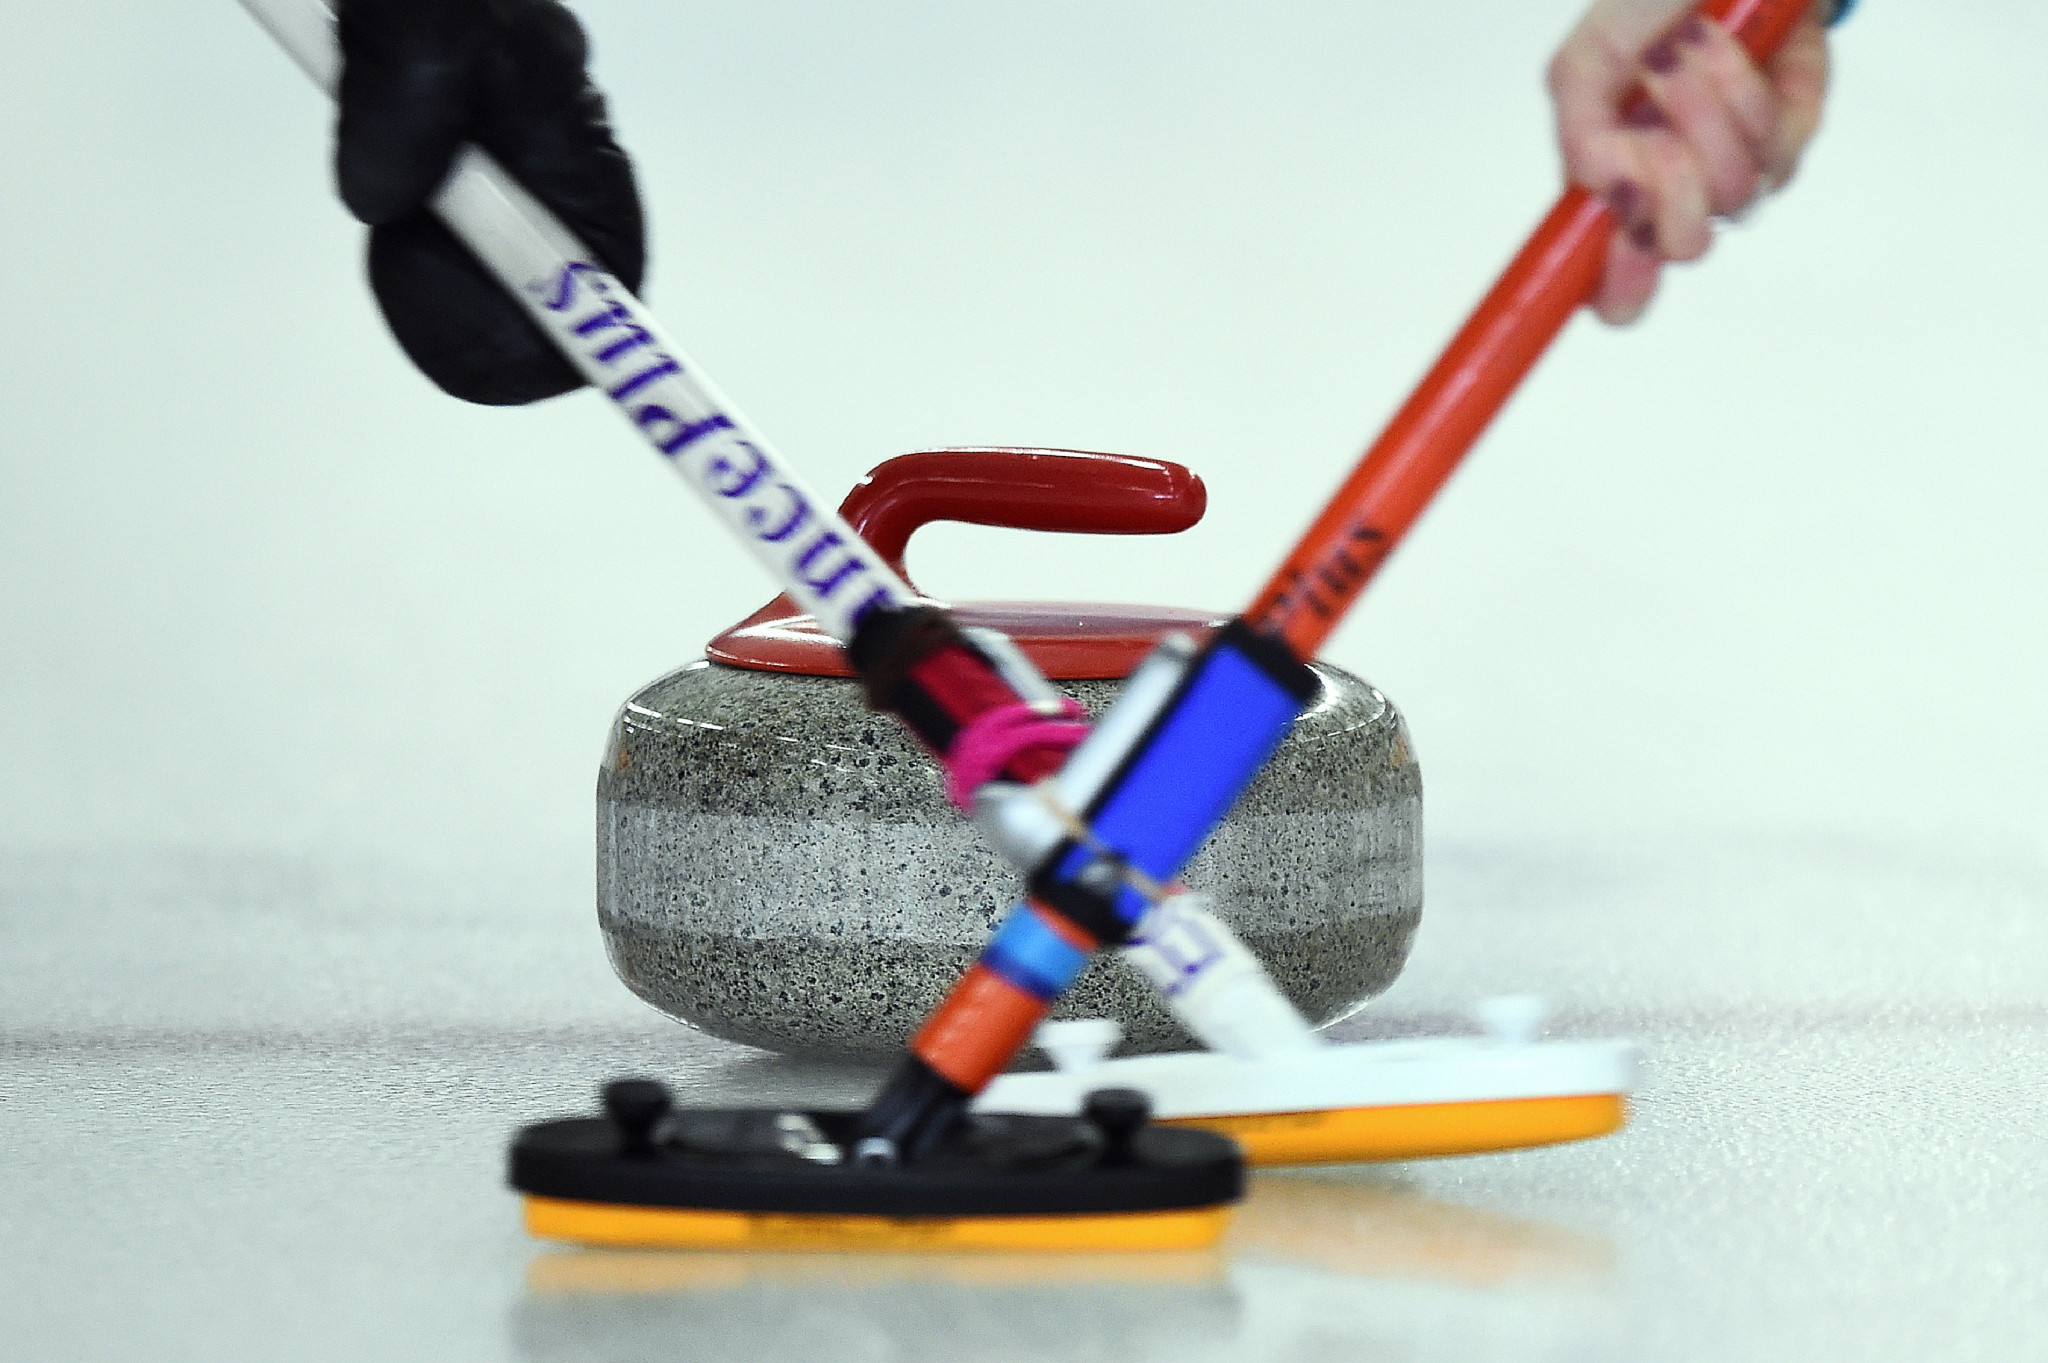 WCF announces cancellation of 2021 World Mixed Curling Championship in Aberdeen